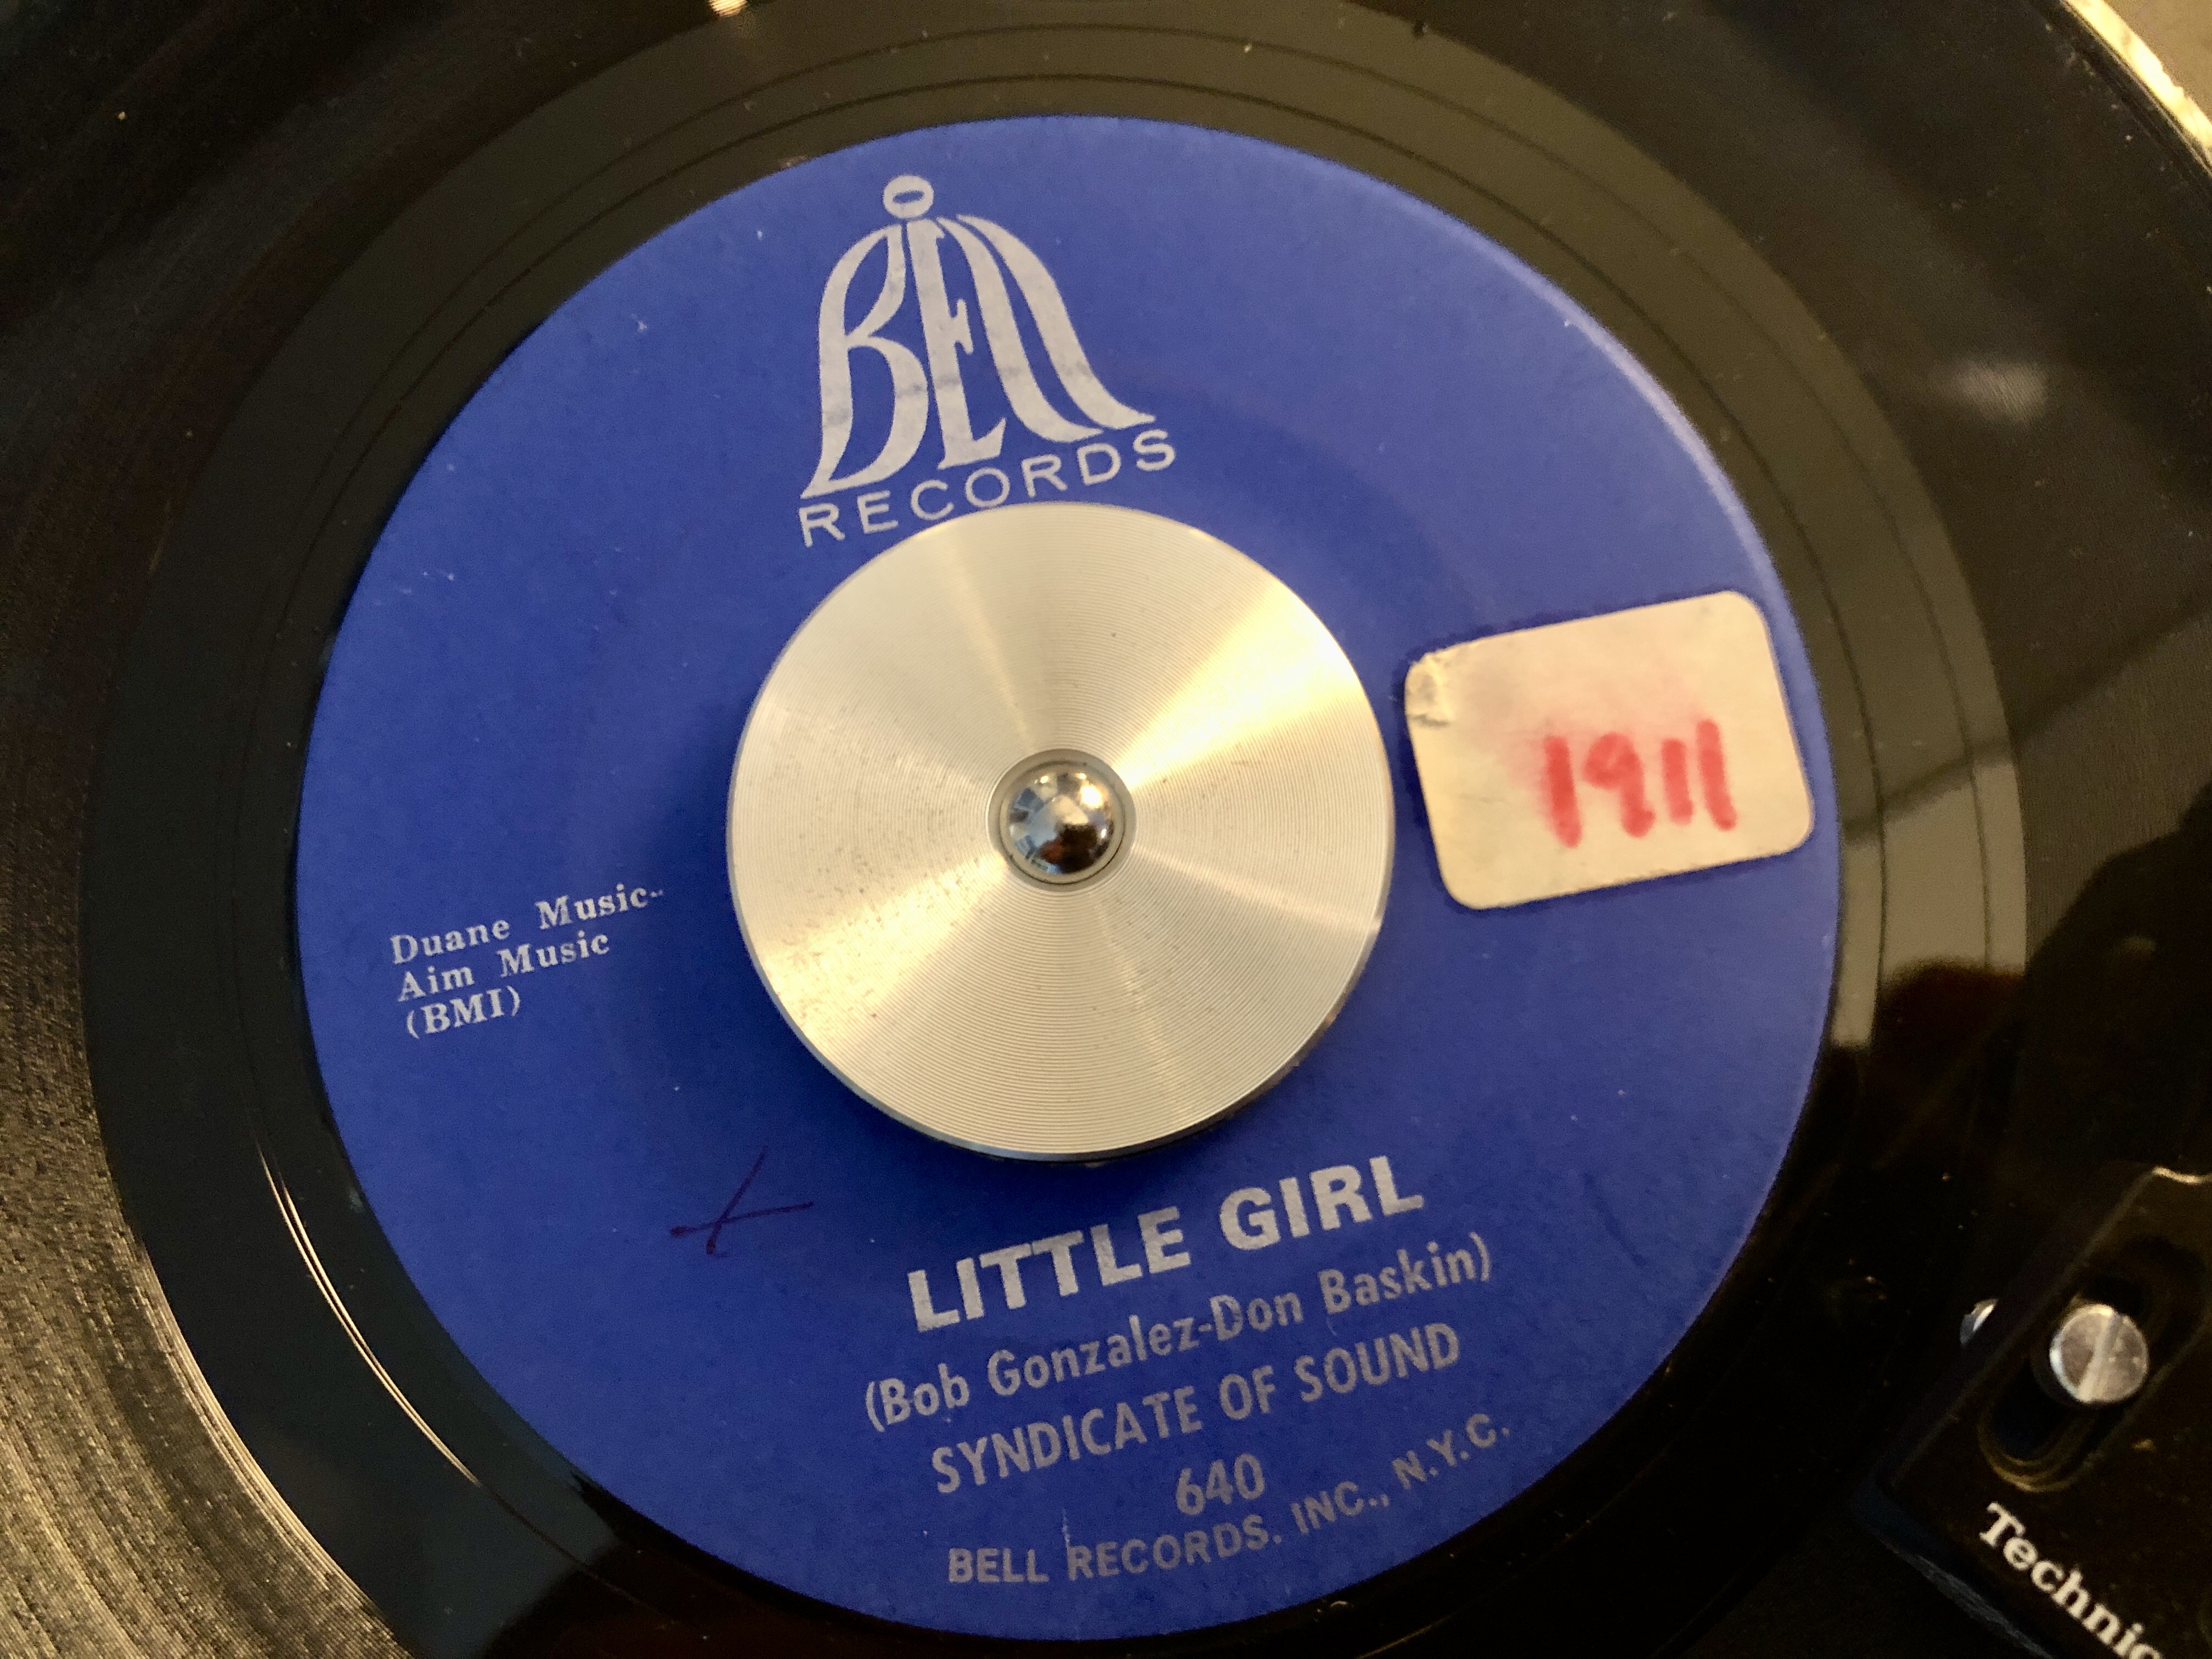 https://www.wfmu.org/Gfx/playlist_images/PQ/7_The_Syndicate_of_Sound___Little_Girl___Bell___45_6623421958443494.jpg